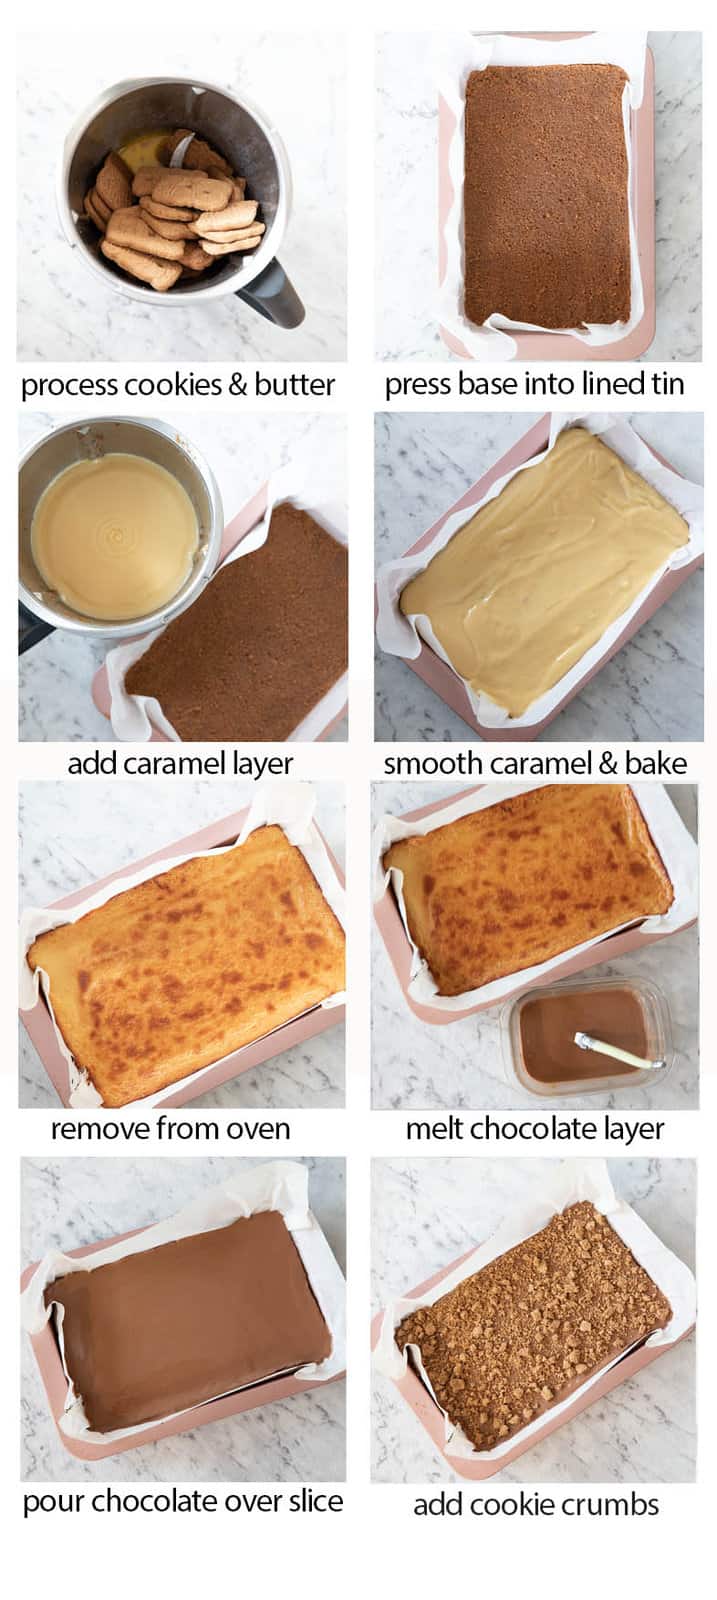 Step by step pictures showing how to make the Biscoff Caramel slice